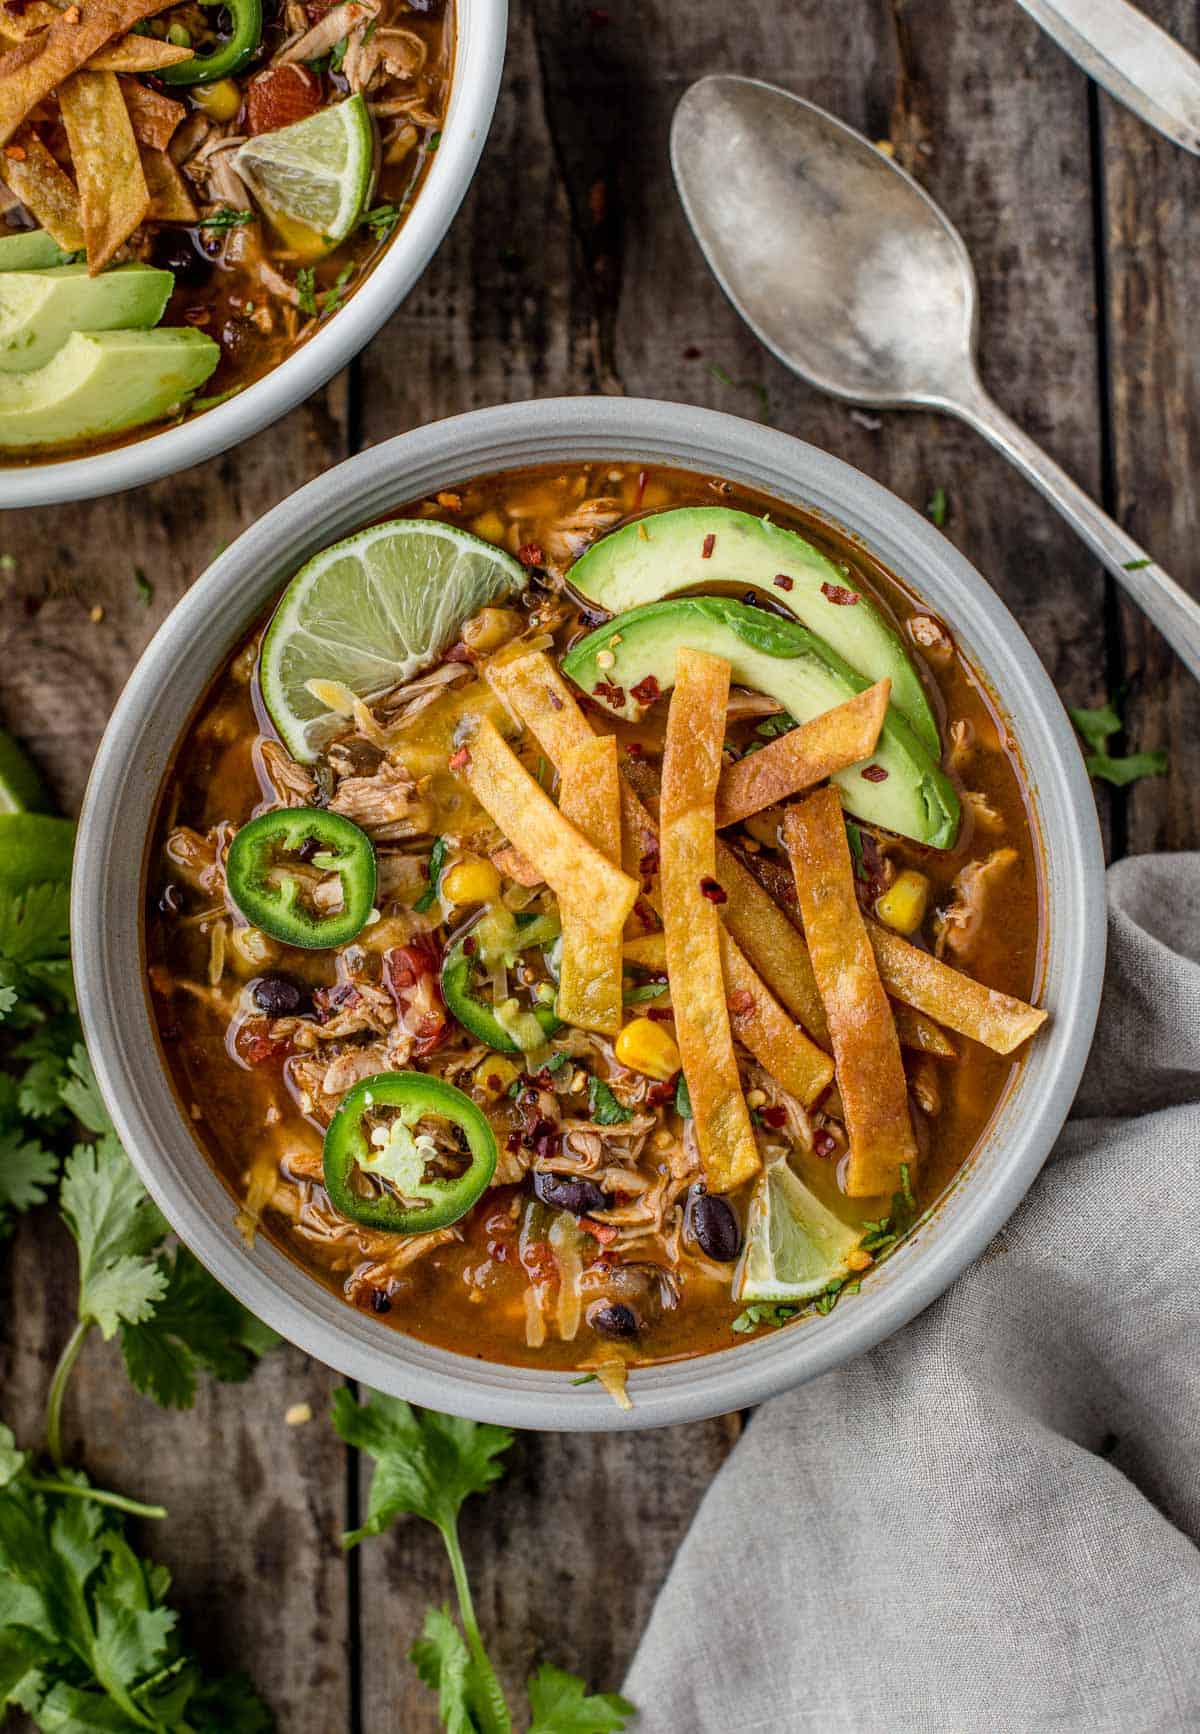 https://www.vindulge.com/wp-content/uploads/2020/10/Smoked-Chicken-Tortilla-Soup-with-Chipotle.jpg